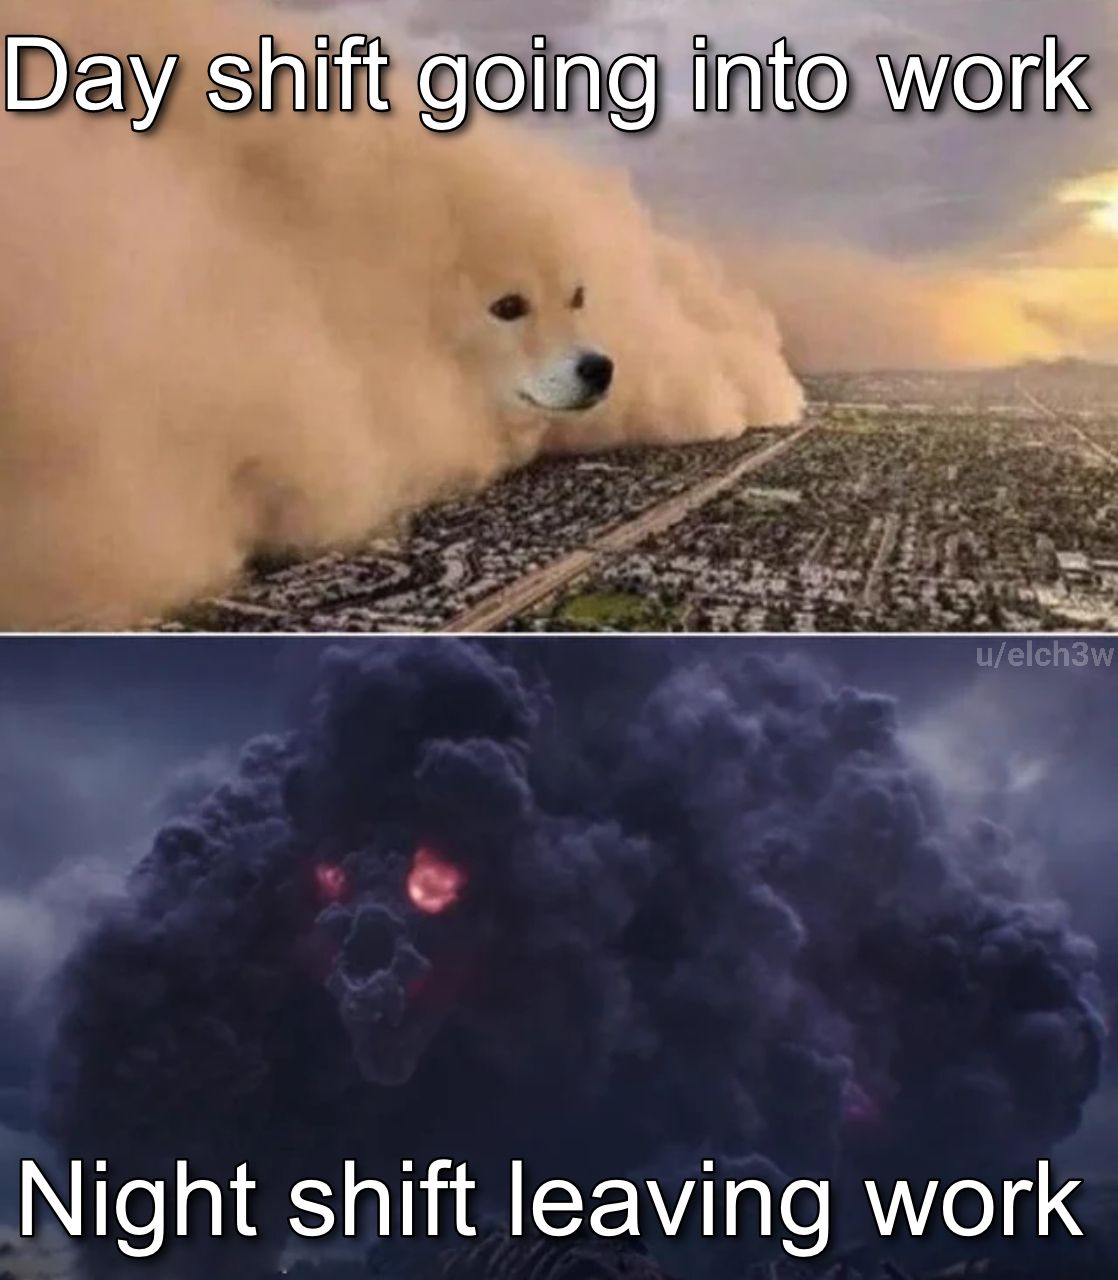 Having done night shift before, can confirm